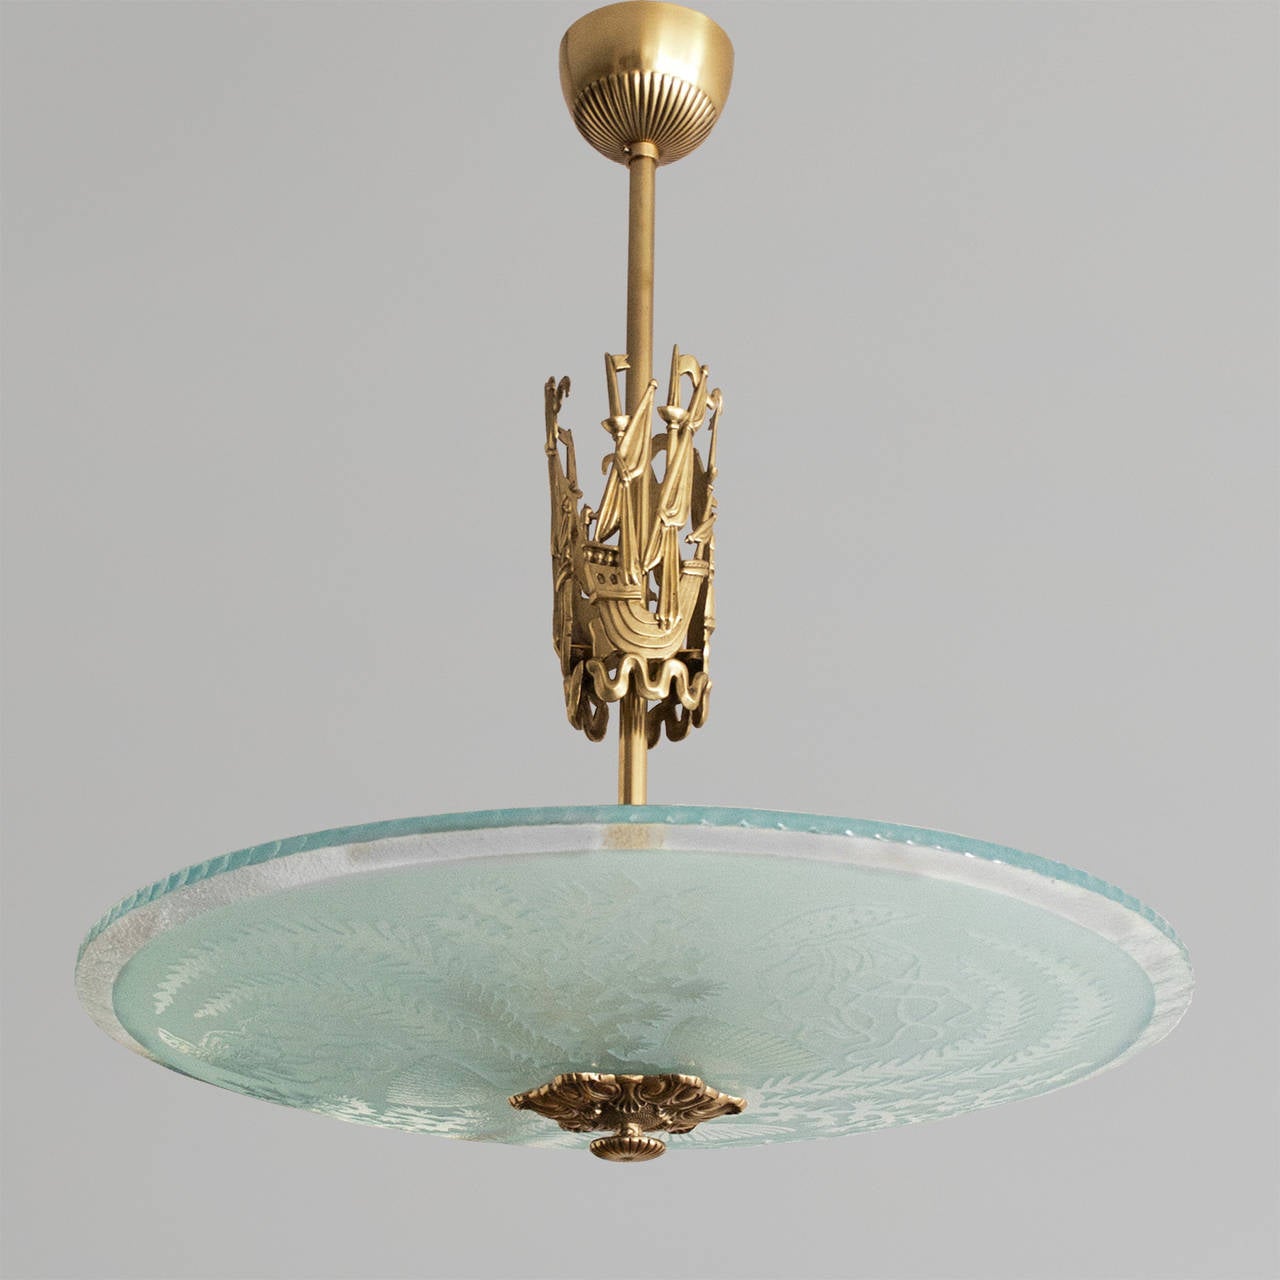 Scandinavian Modern etched glass fixture by Atelier Torndahl. The glass shade is acid and hand etched with underwater plants and jelly fish. The polished brass stem features 3 stylized ships made of cast brass. Measures: Height: 28